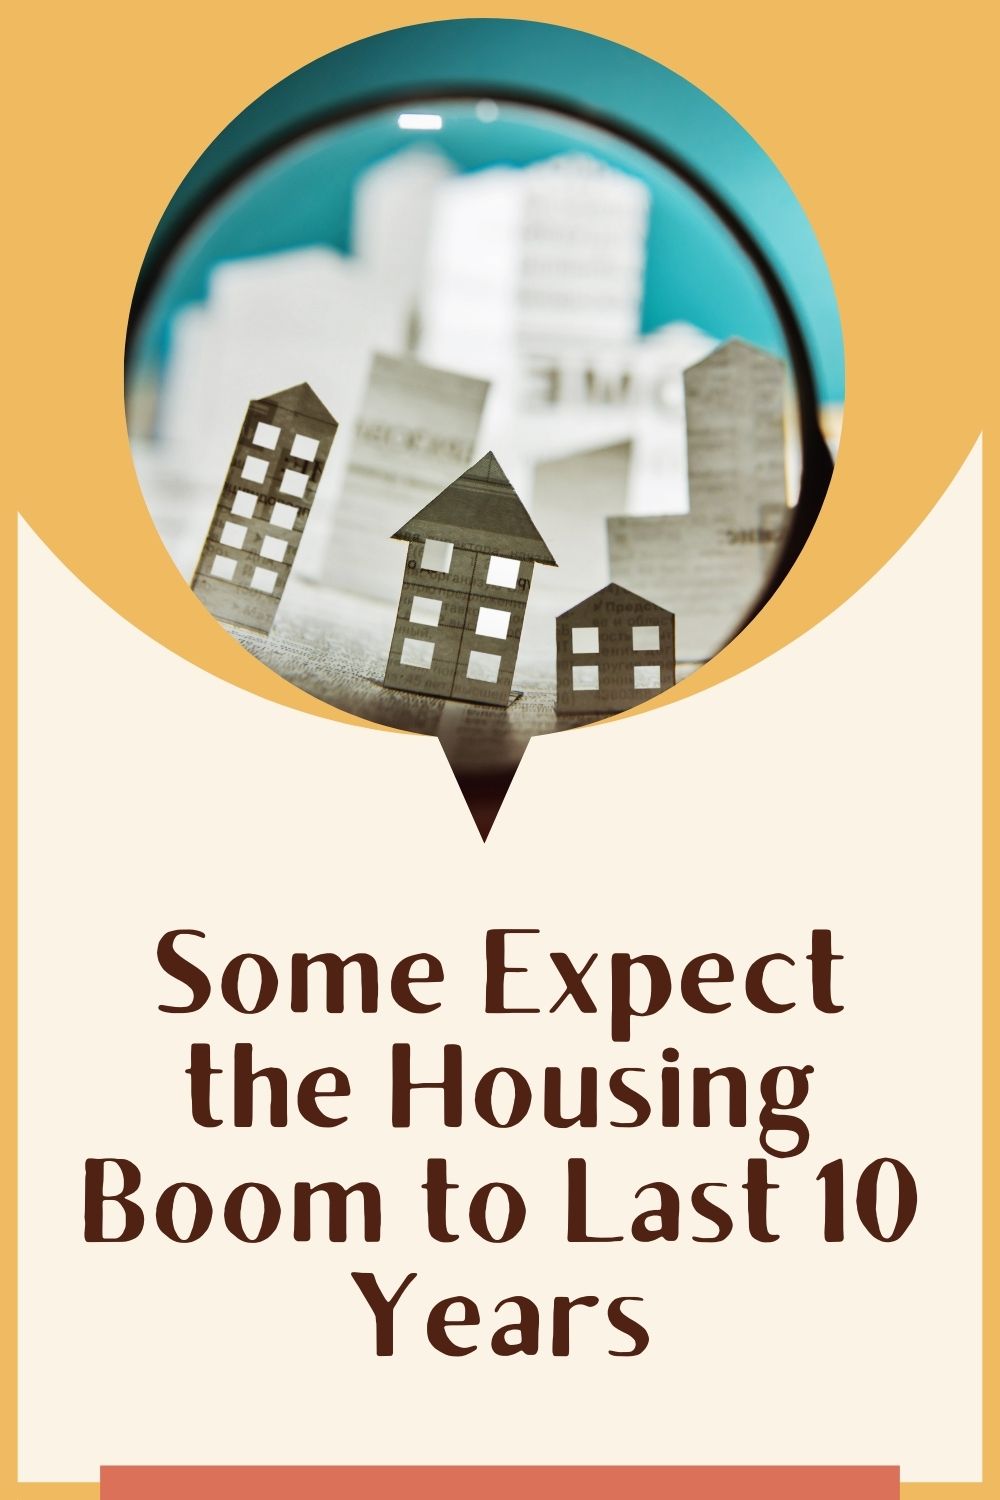 Some Expect the Housing Boom to Last 10 Years